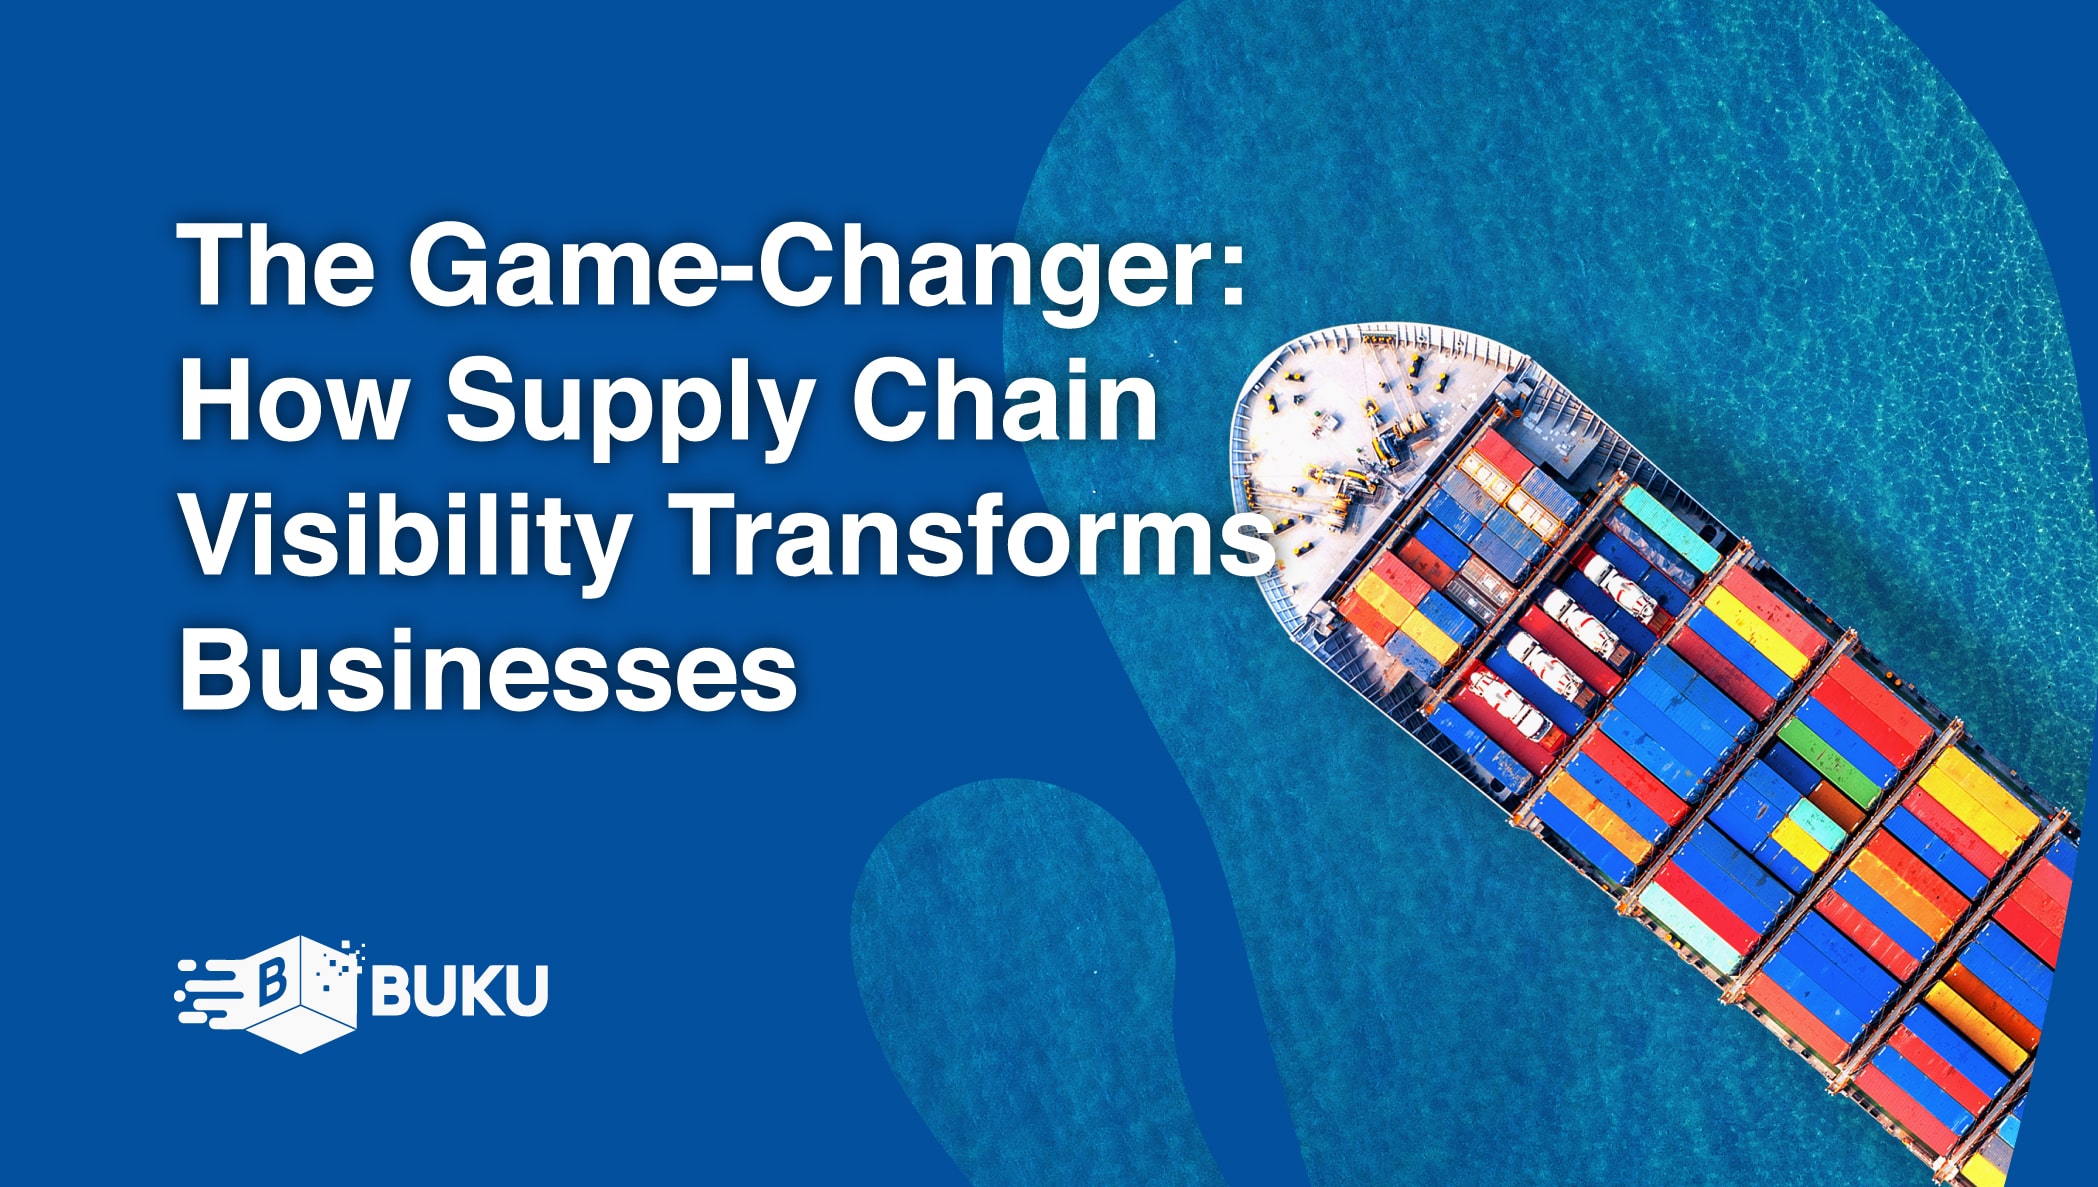 The Game-Changer: How Supply Chain Visibility Transforms Businesses